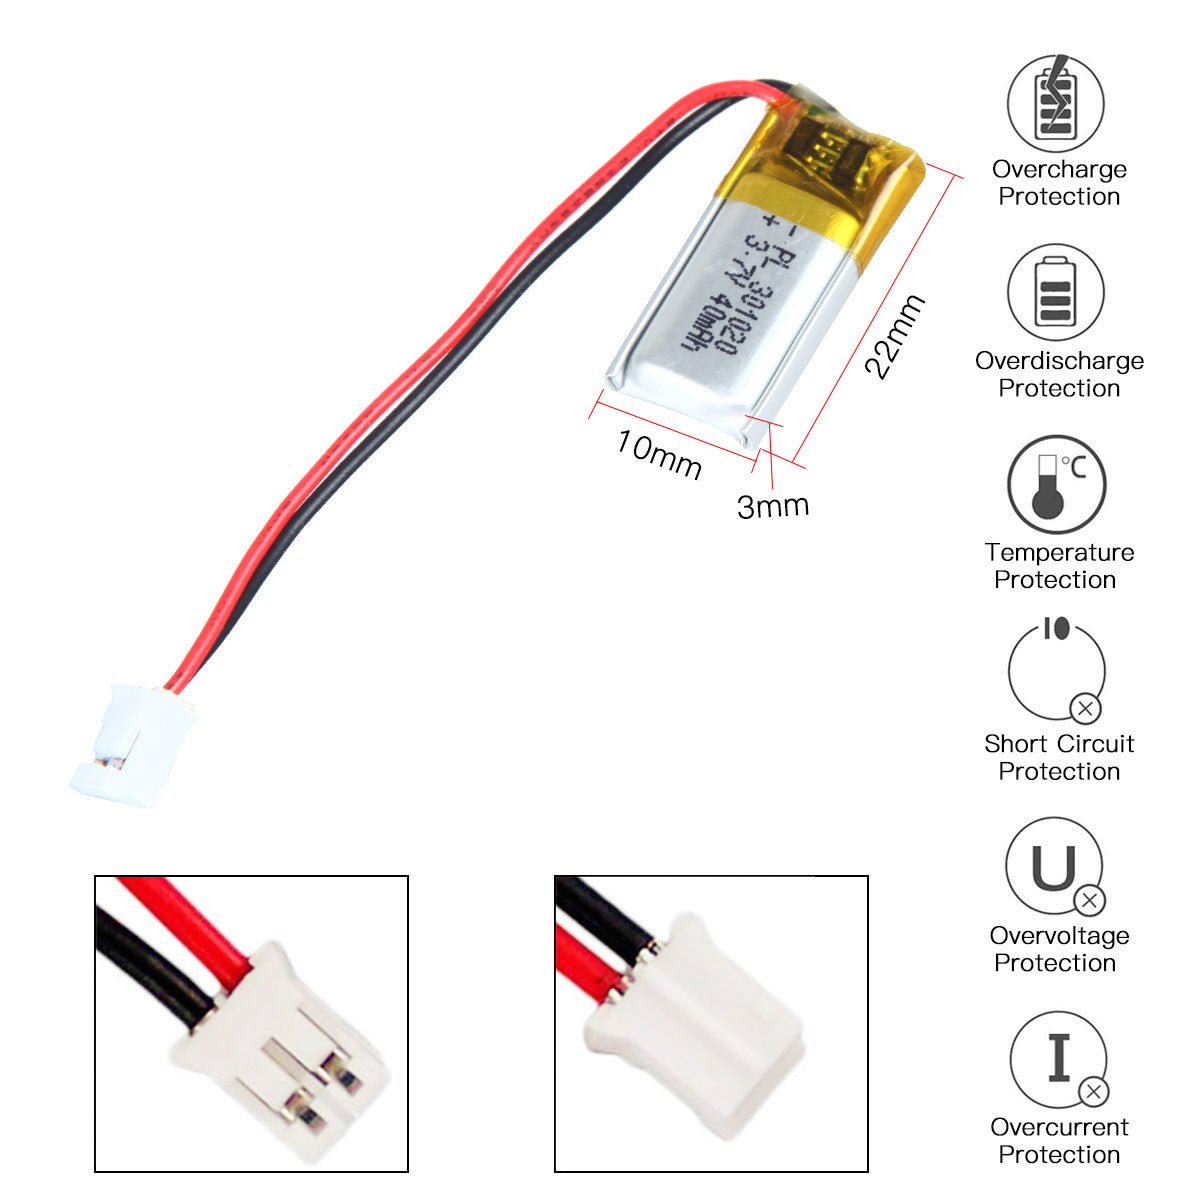 YDL 3.7V 40mAh 301020/301120 RechargeableLithium Polymer Battery Length 22mm